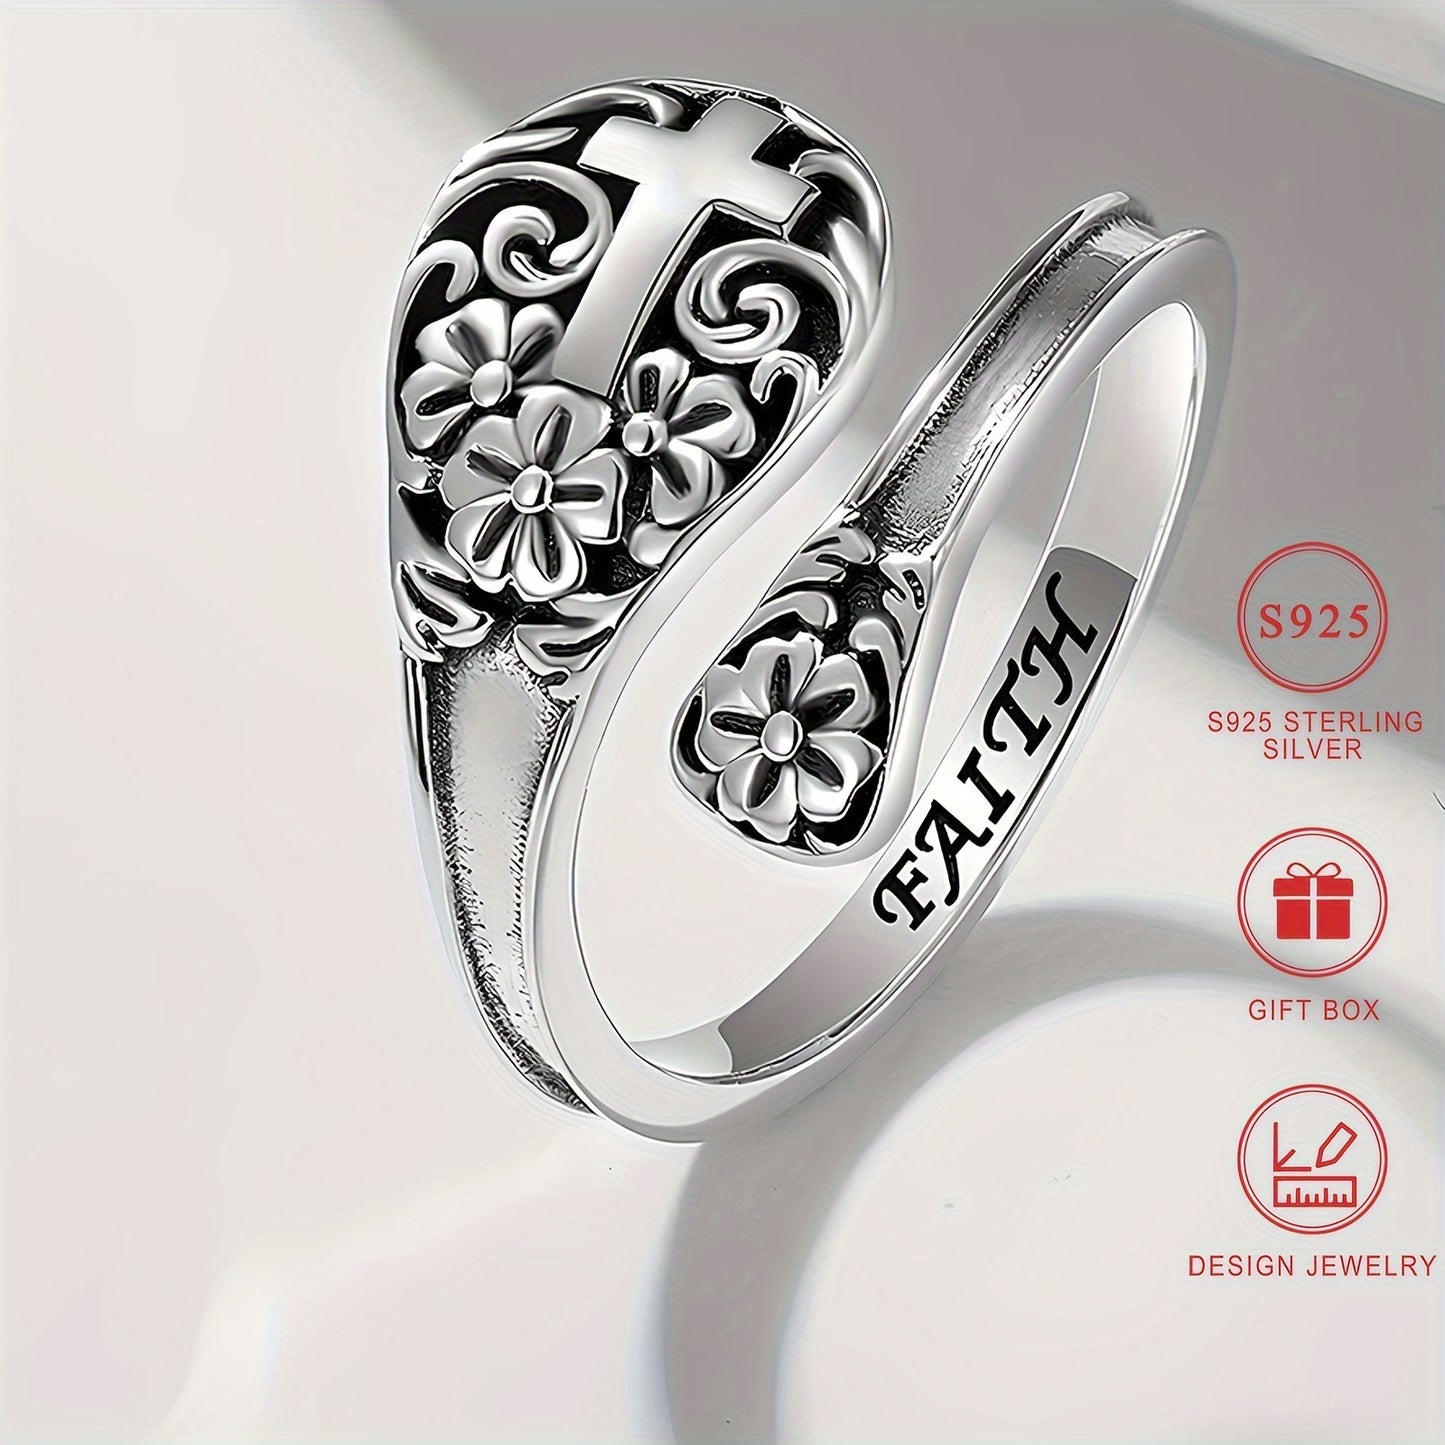 925 Sterling Silver Spoon Ring 18k Gold Plated Retro Cross + 3D Flower Design Suitable For Men And Women Match Daily Outfits With Gift Box